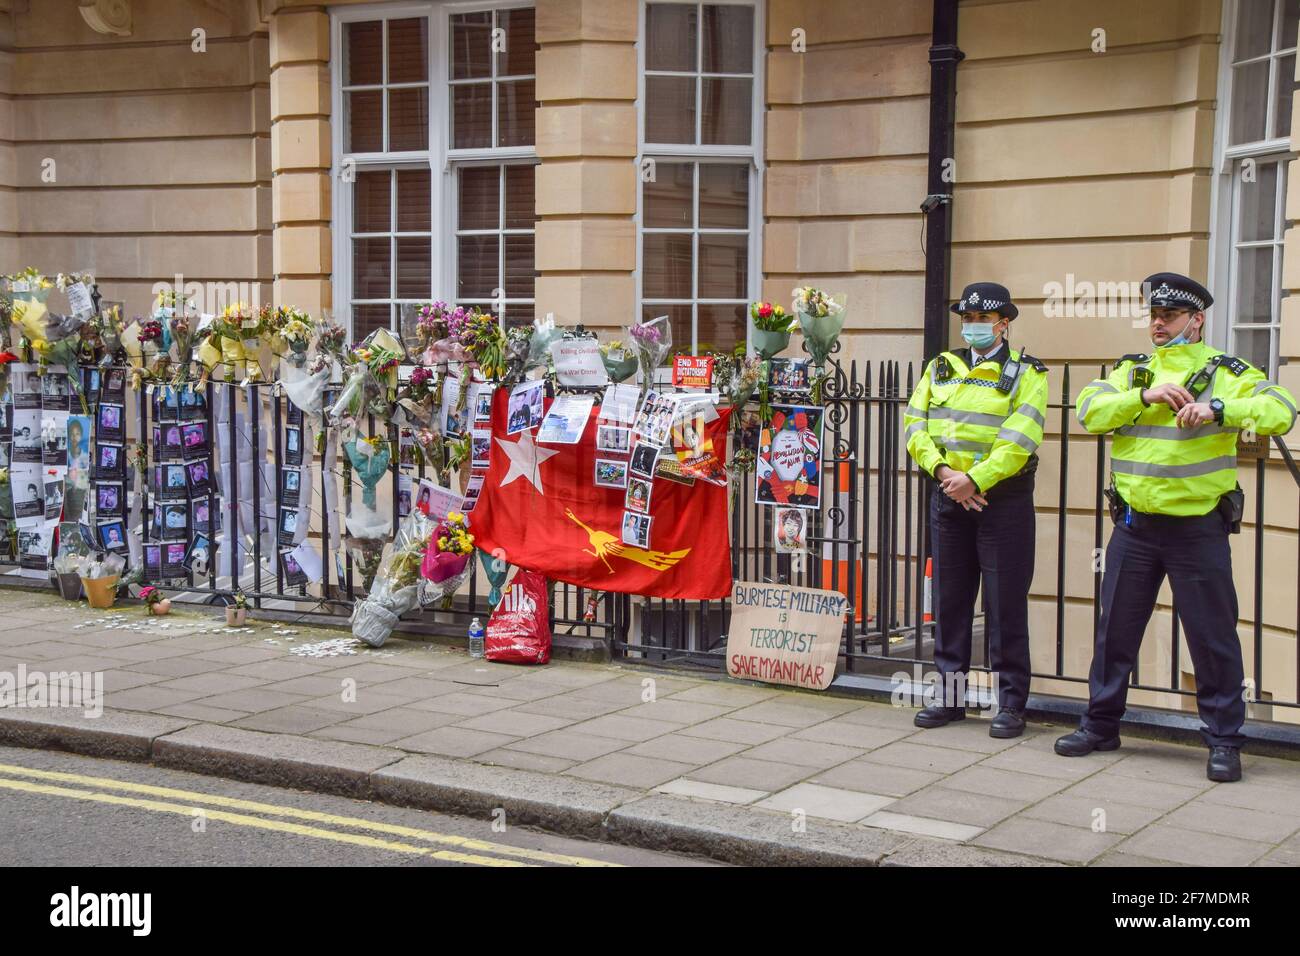 London, UK. 08th Apr, 2021. Police stand guard outside the Myanmar embassy in London.Myanmar's ambassador to the UK, Kyaw Zwar Minn, has been locked out of the embassy in Mayfair, which he has described as a "coup". (Photo by Vuk Valcic/SOPA Images/Sipa USA) Credit: Sipa USA/Alamy Live News Stock Photo